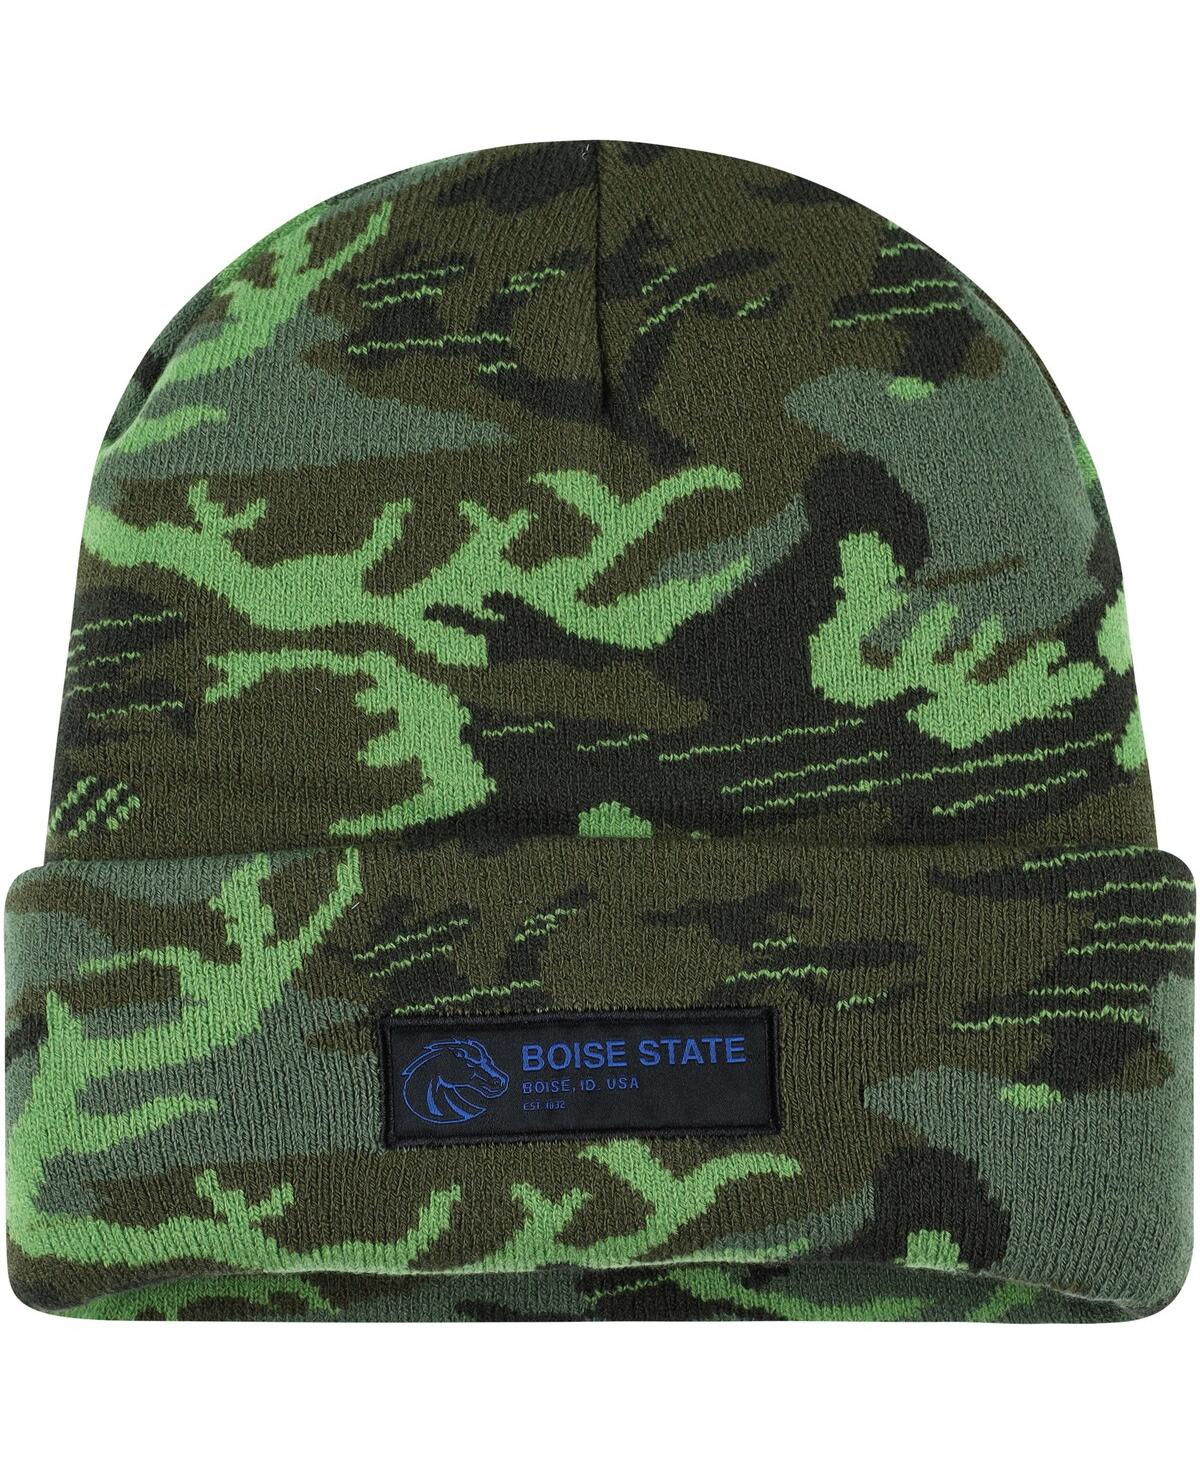 Nike Men's  Camo Boise State Broncos Veterans Day Cuffed Knit Hat